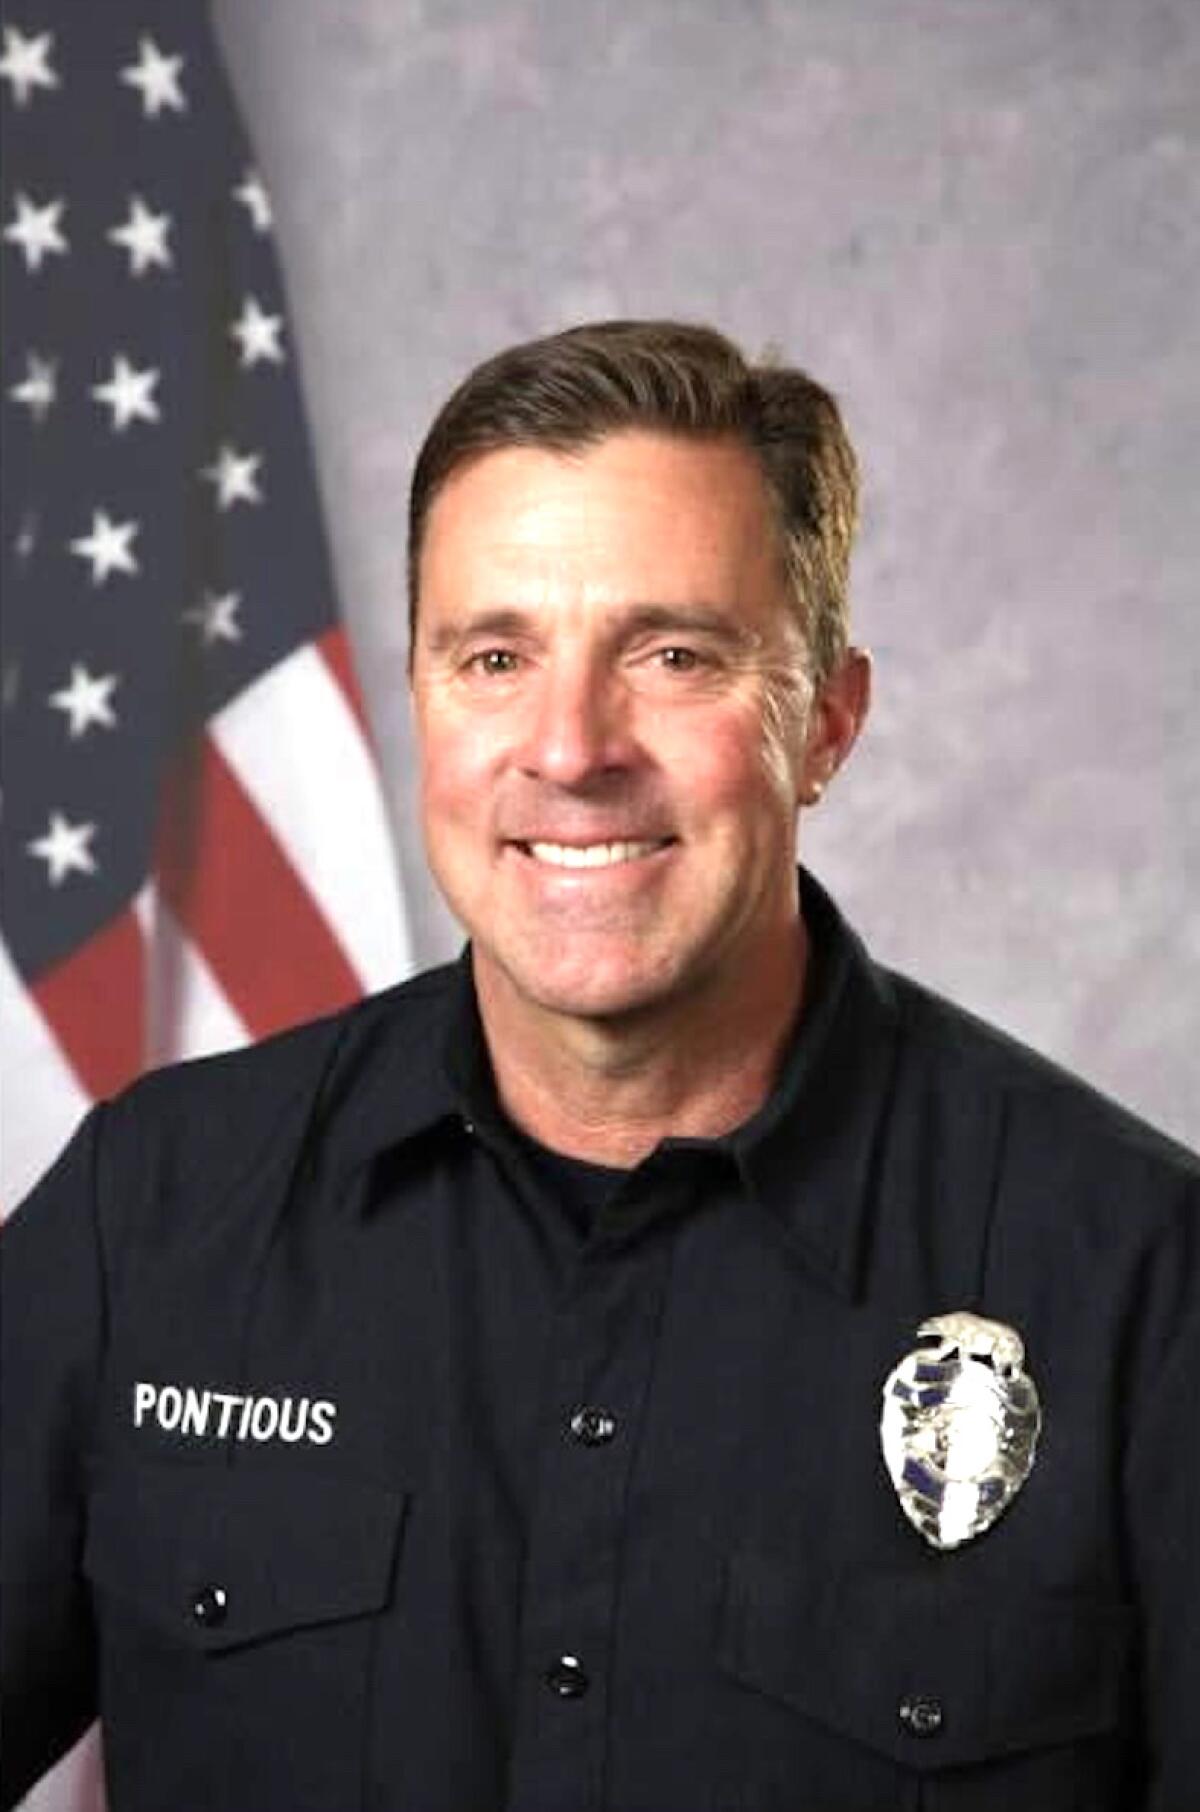 L.A. County firefighter Andrew Pontious